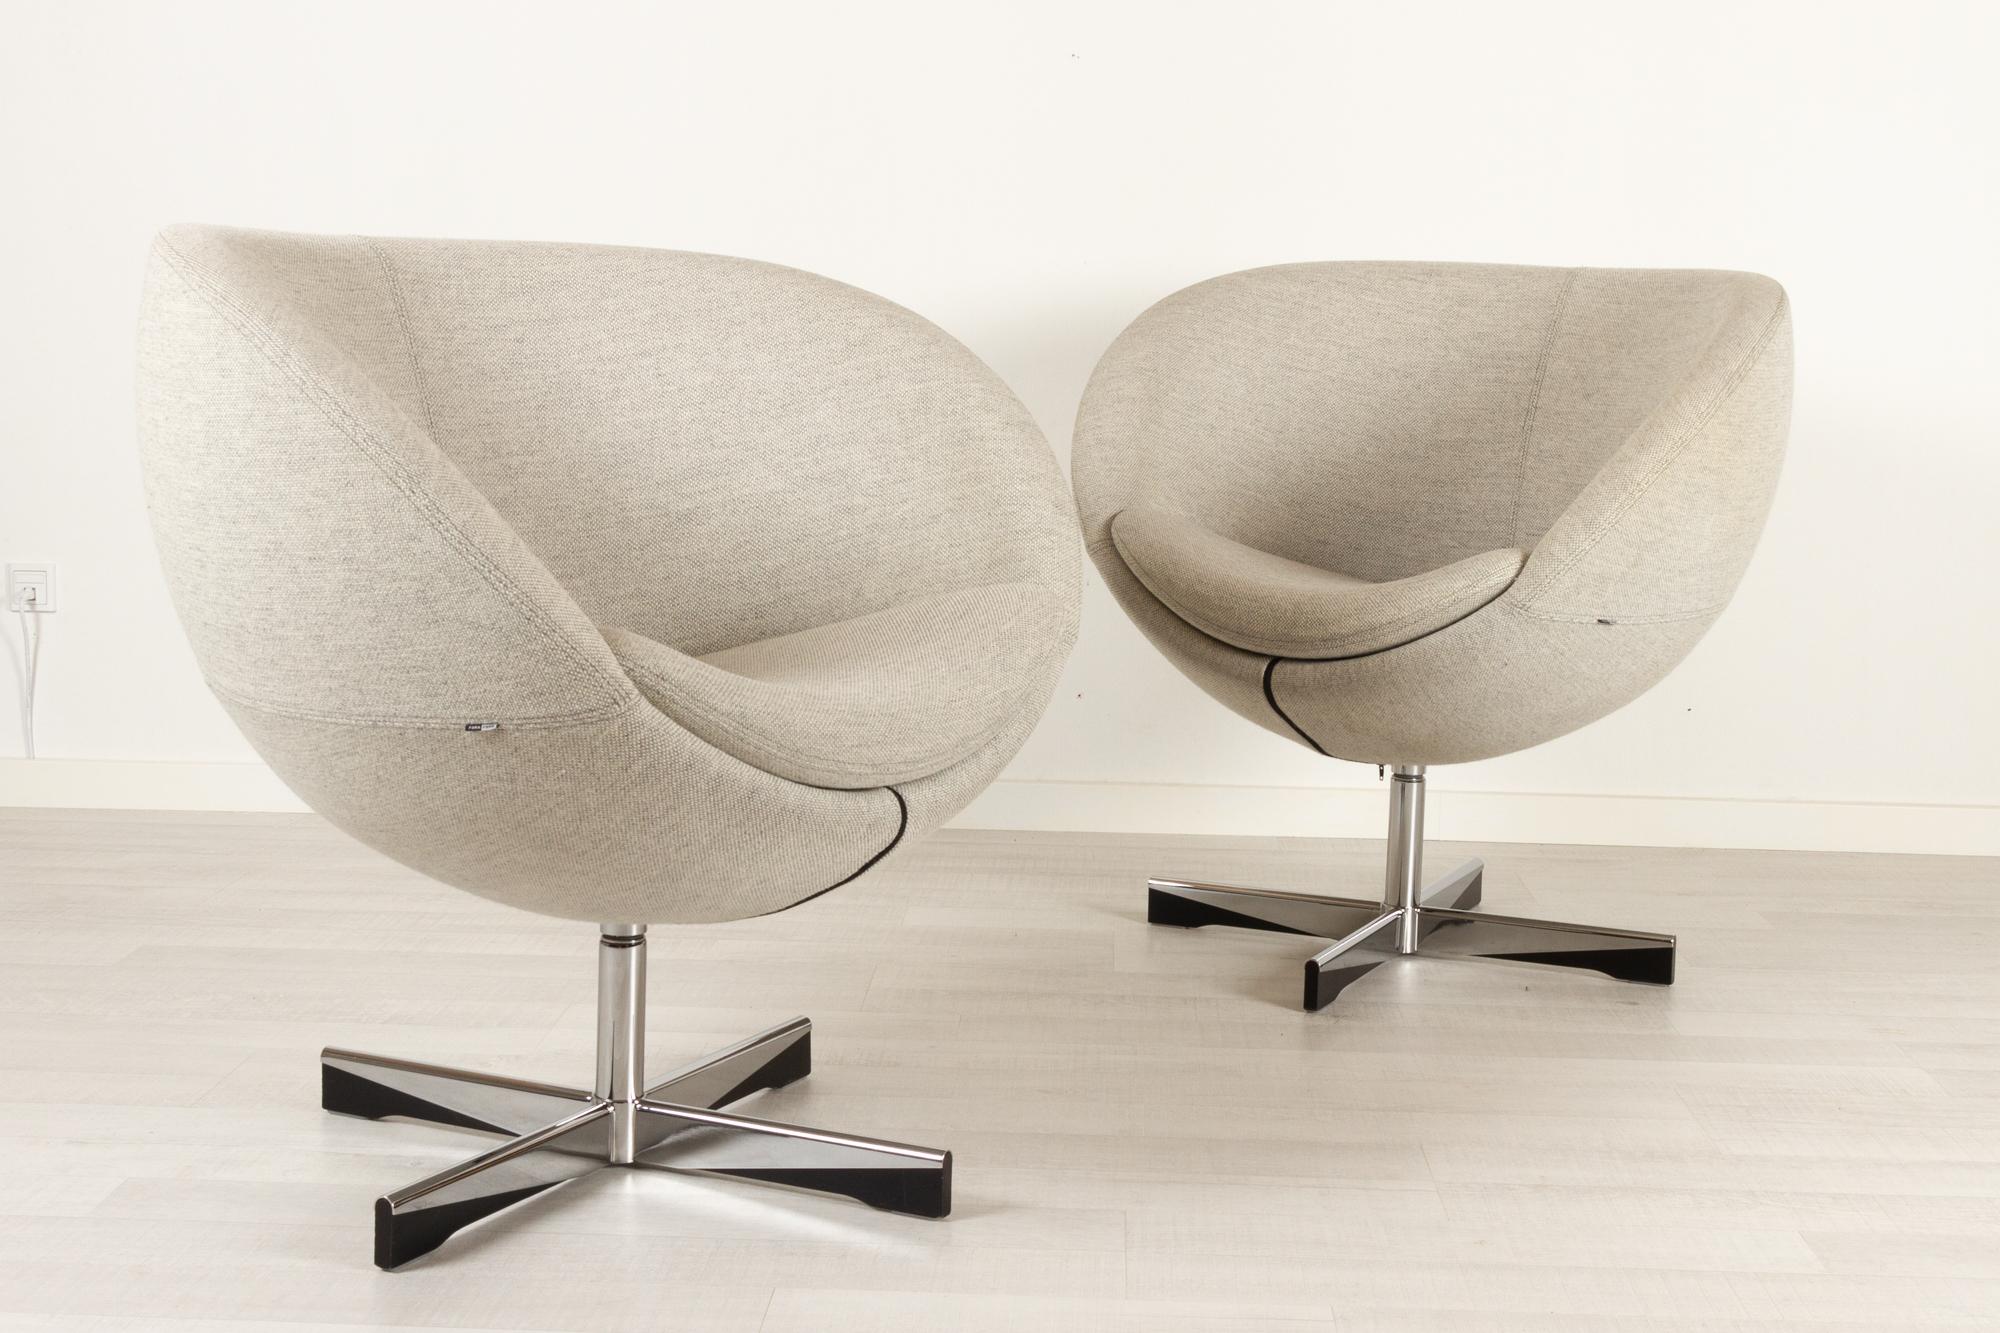 Pair of Scandinavian Modern lounge chairs by Sven Ivar Dysthe 21st century
The model Planet chair was designed by Sven Ivar Dysthe in 1965. The chair is an established Norwegian furniture Classic. The encompassing round shape provides a very